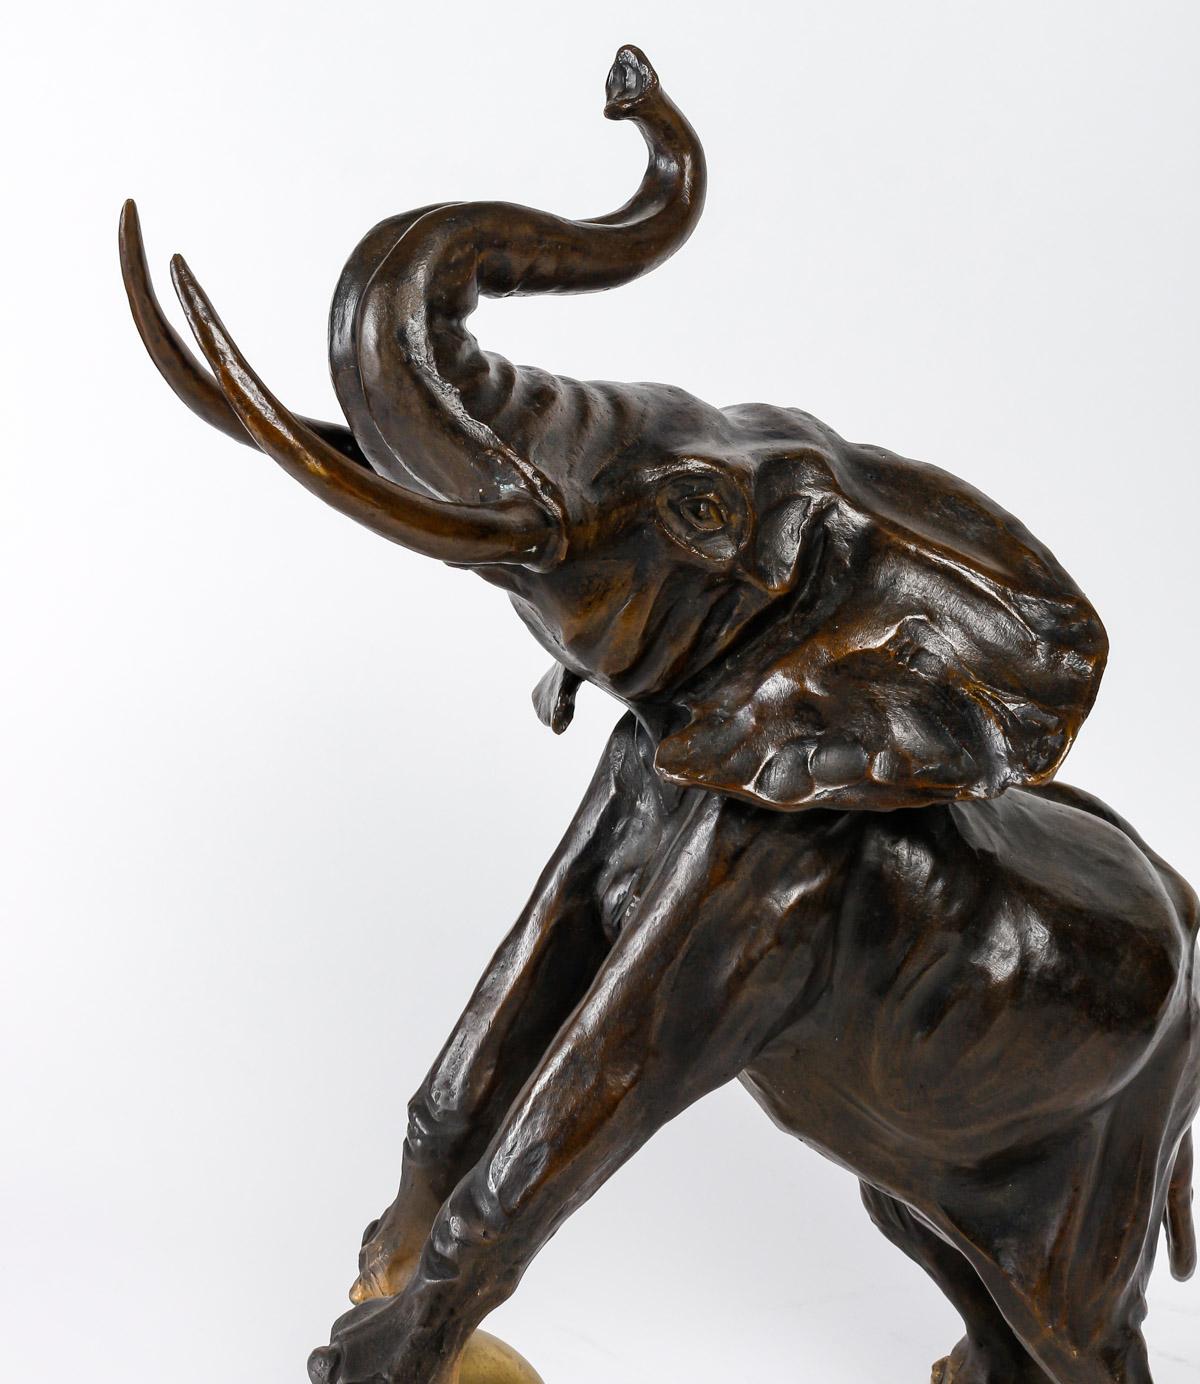 Bronze Circus Elephant Sculpture by Artist Hadrien David.

Bronze, sculpture of a circus elephant in patinated and gilded bronze by the artist Hadrien David, edition 7/8, Contemporary sculpture, XXIst century.
h: 50cm, l: 43cm, p: 23cm

